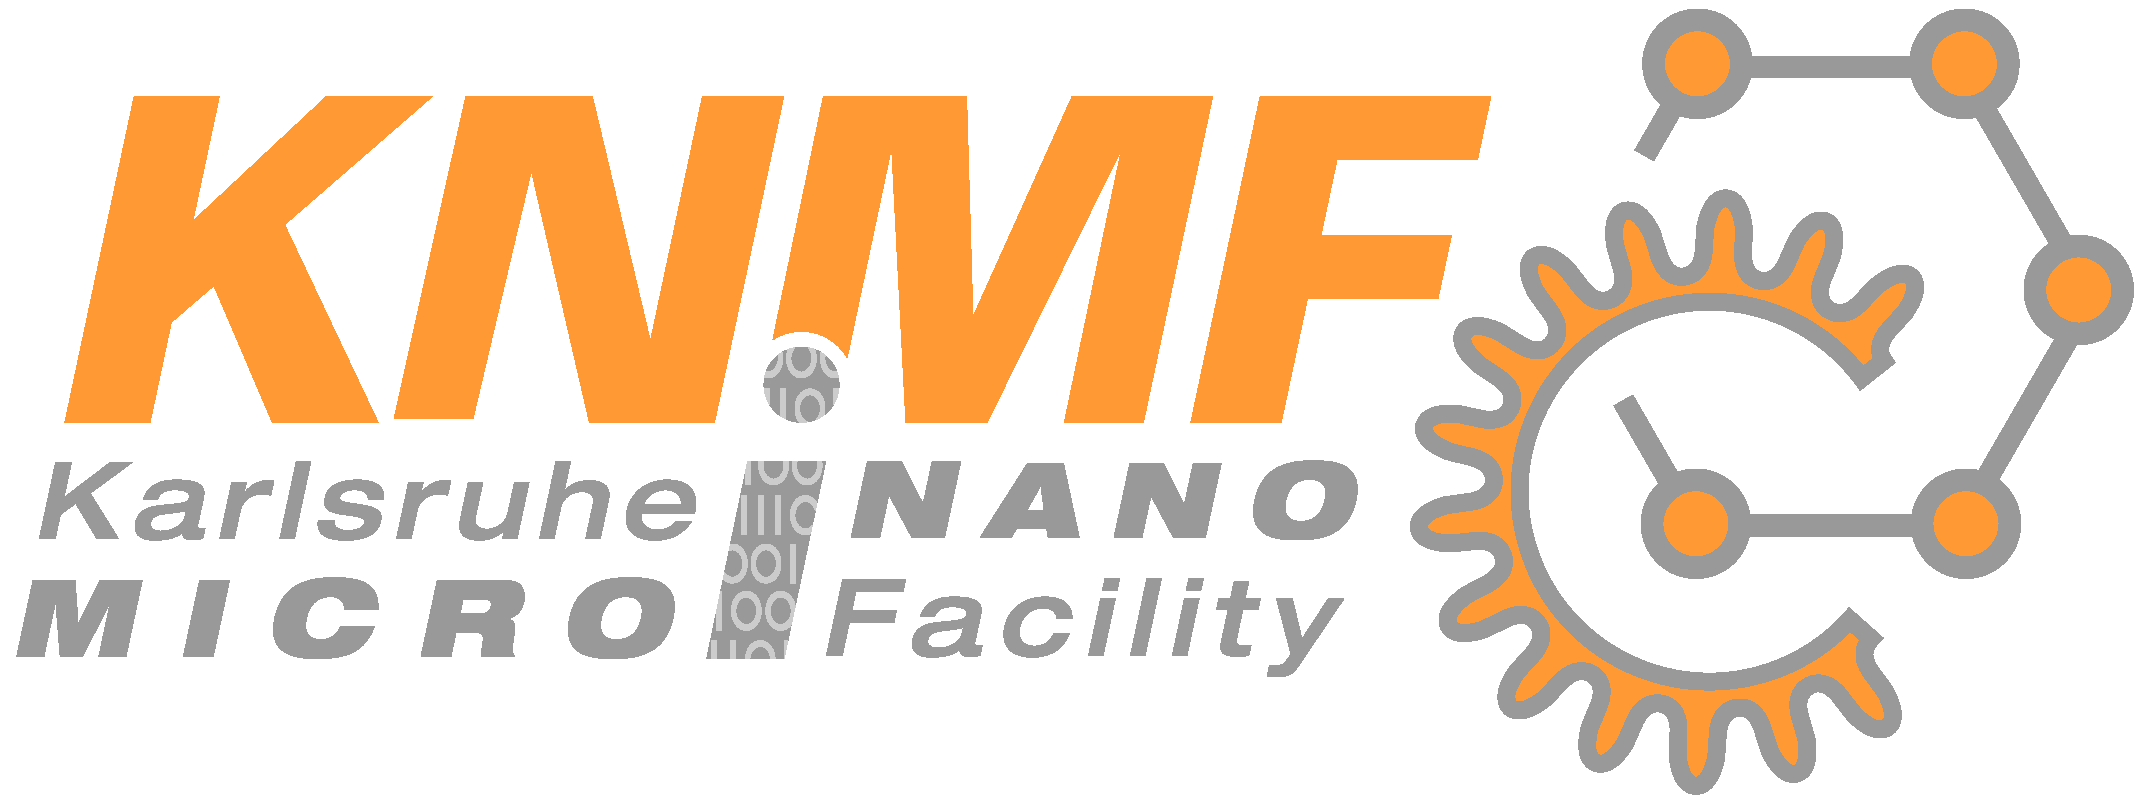 Karlsruhe Nano Micro Facility for Information-driven Material Structuring and Characterization Image